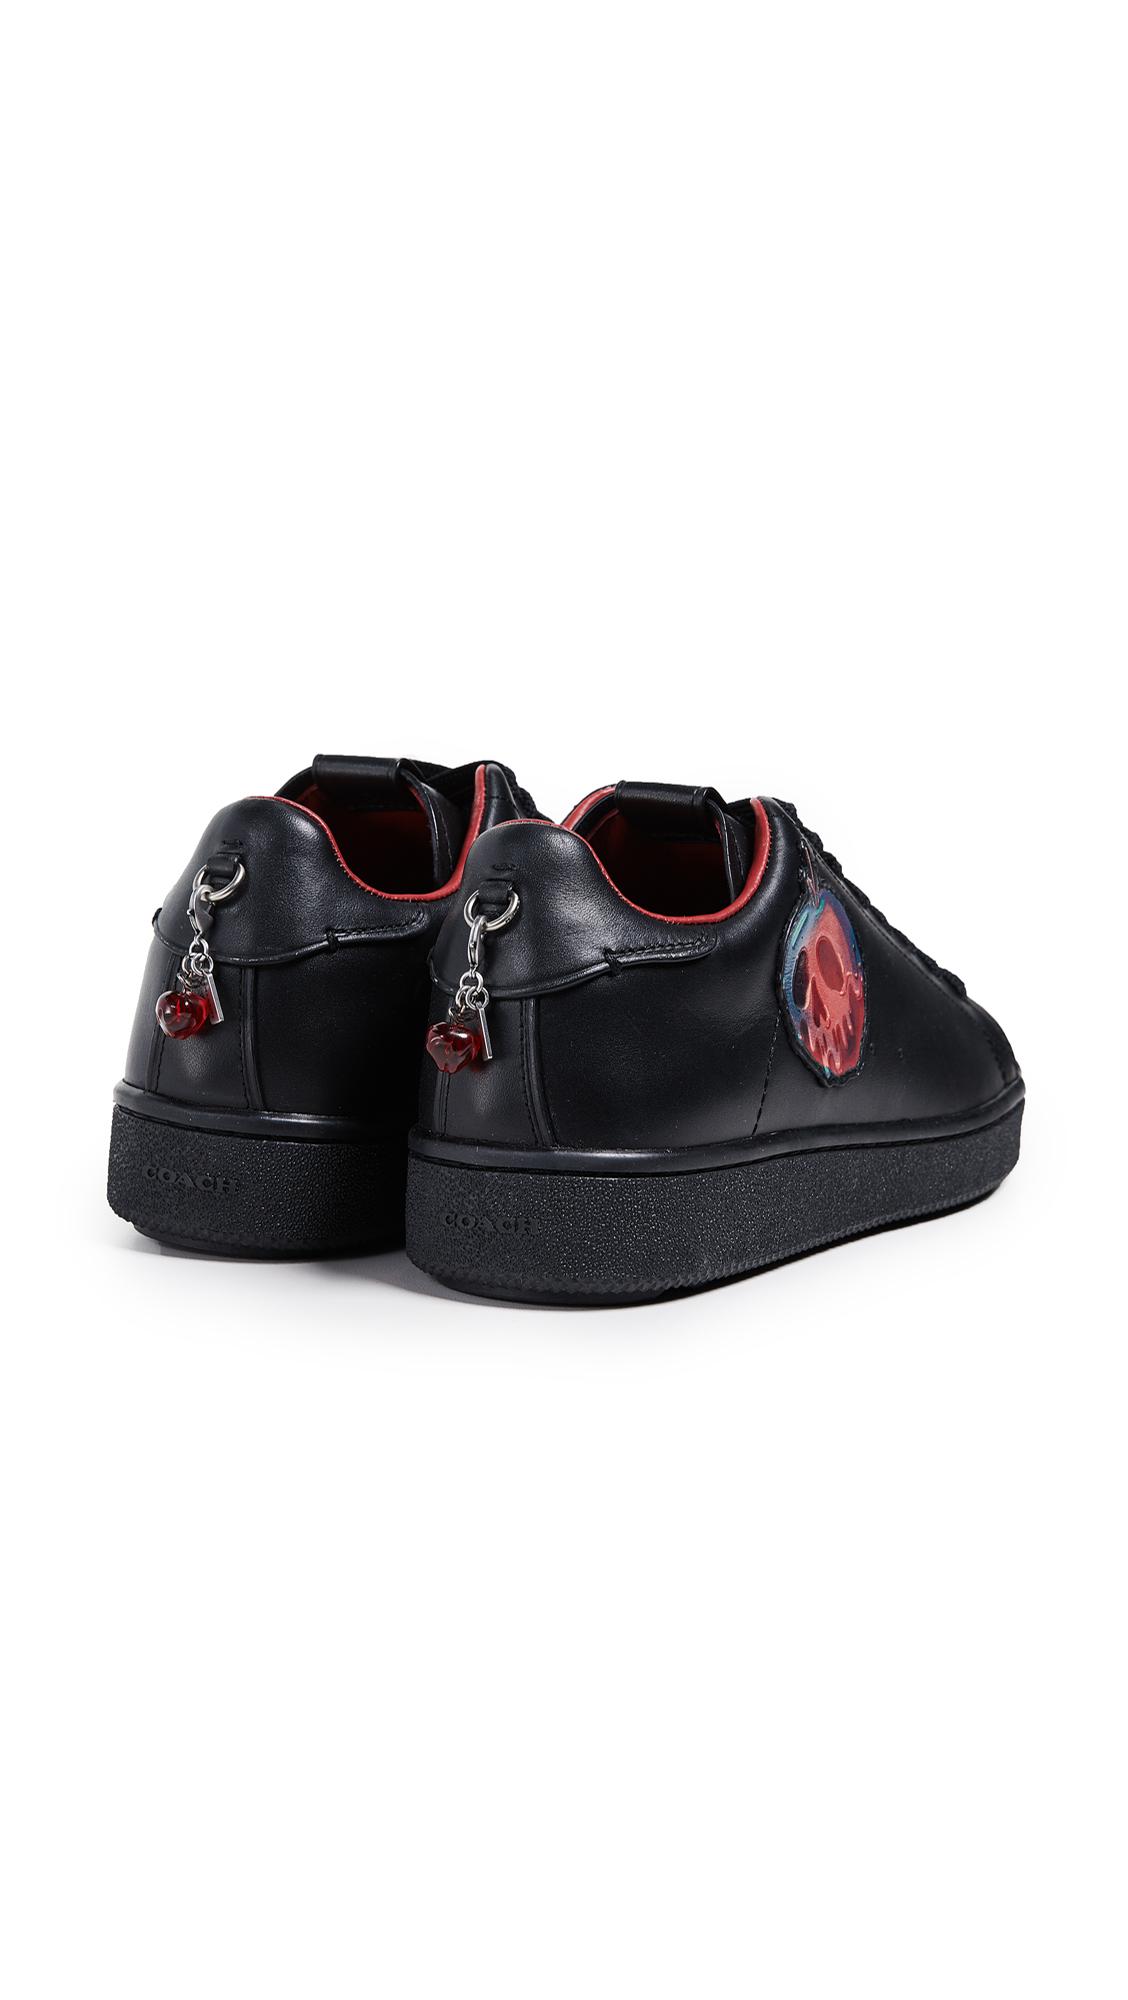 COACH Leather X Disney Poison Apple Sneakers in Black for Men - Lyst